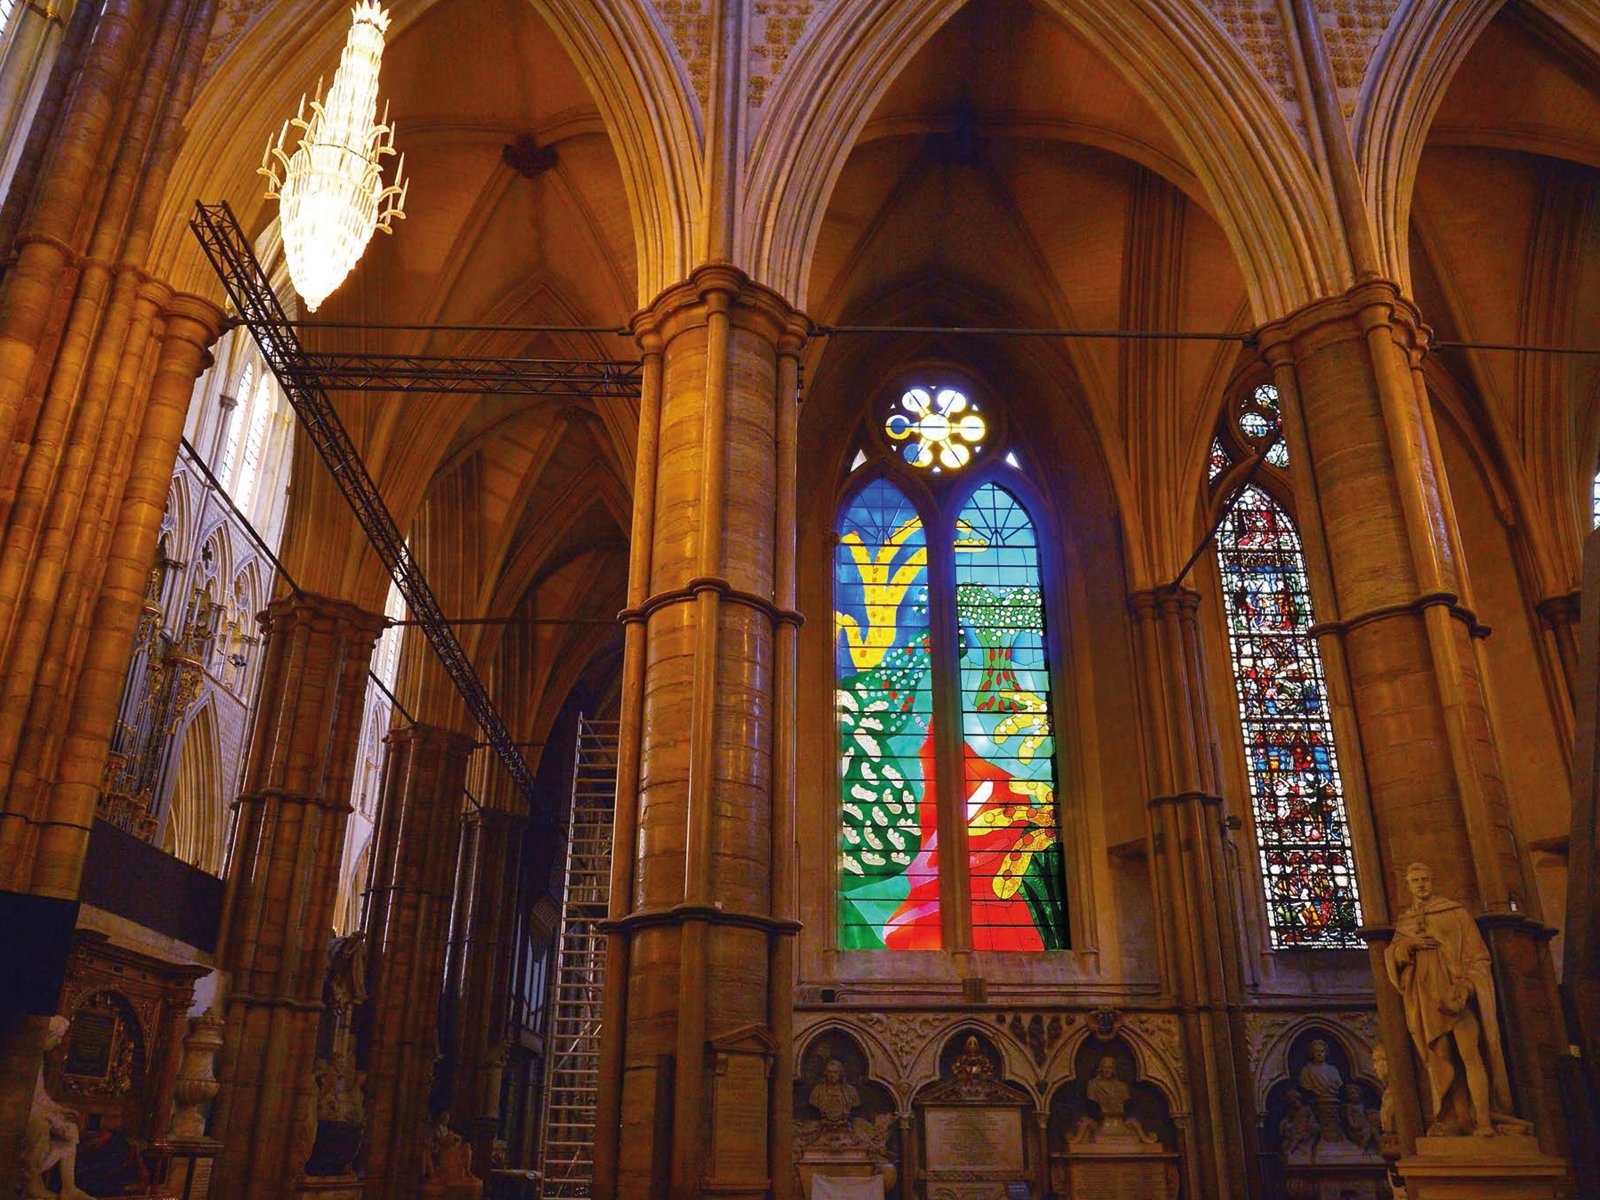 Stained glass design by David Hockney, The Queen's Window on black cover, The Queen's Window by David Hockney Westminster Abbey in green and white font to right